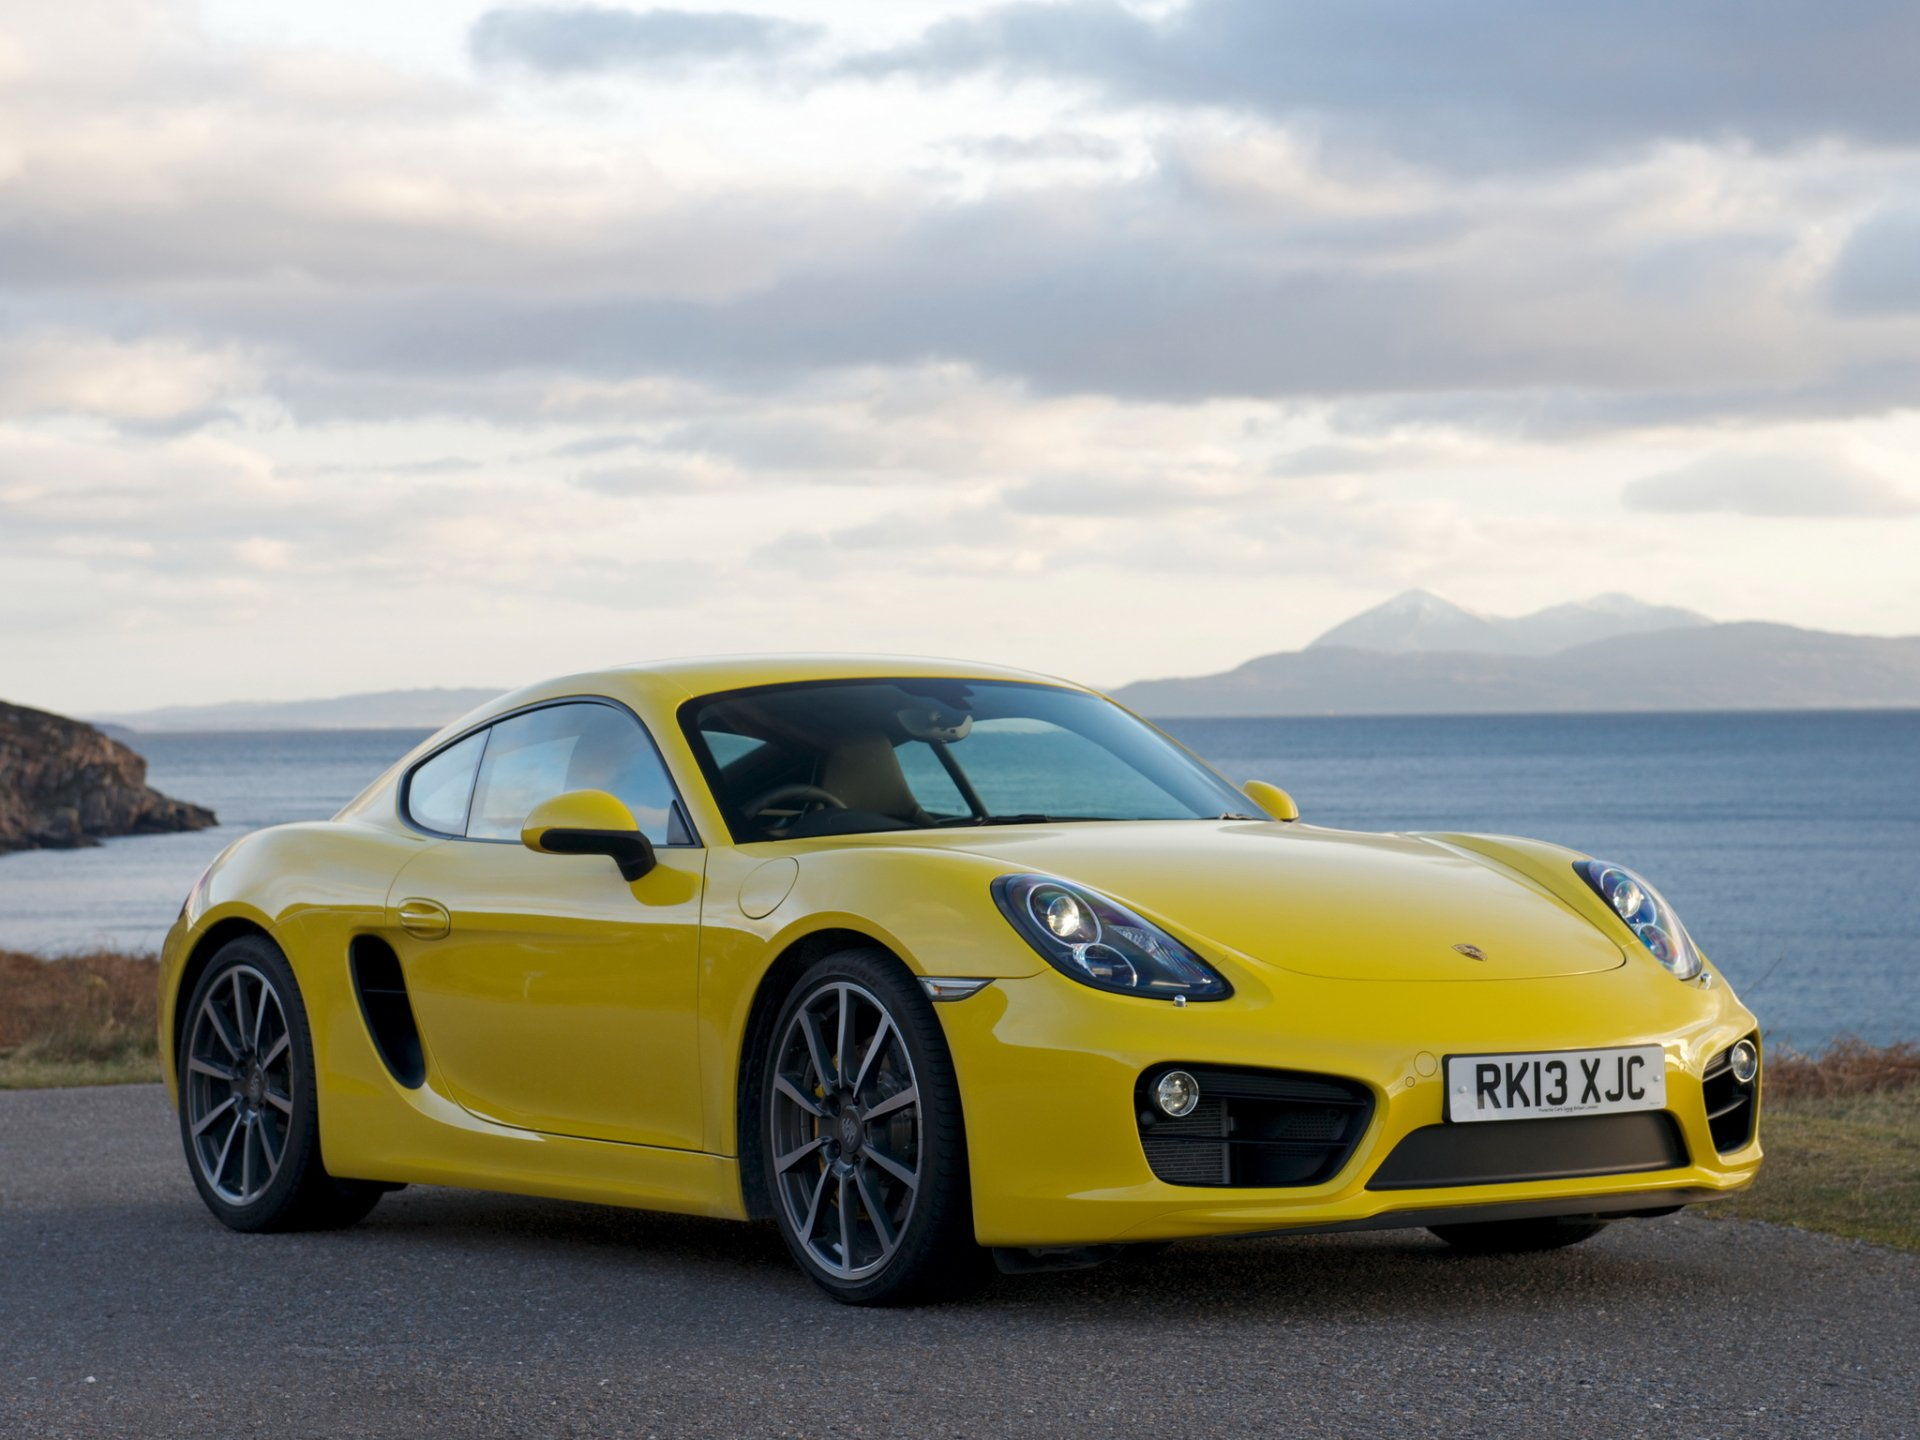 1920x1440 40+ Porsche Cayman S HD Wallpapers and Backgrounds